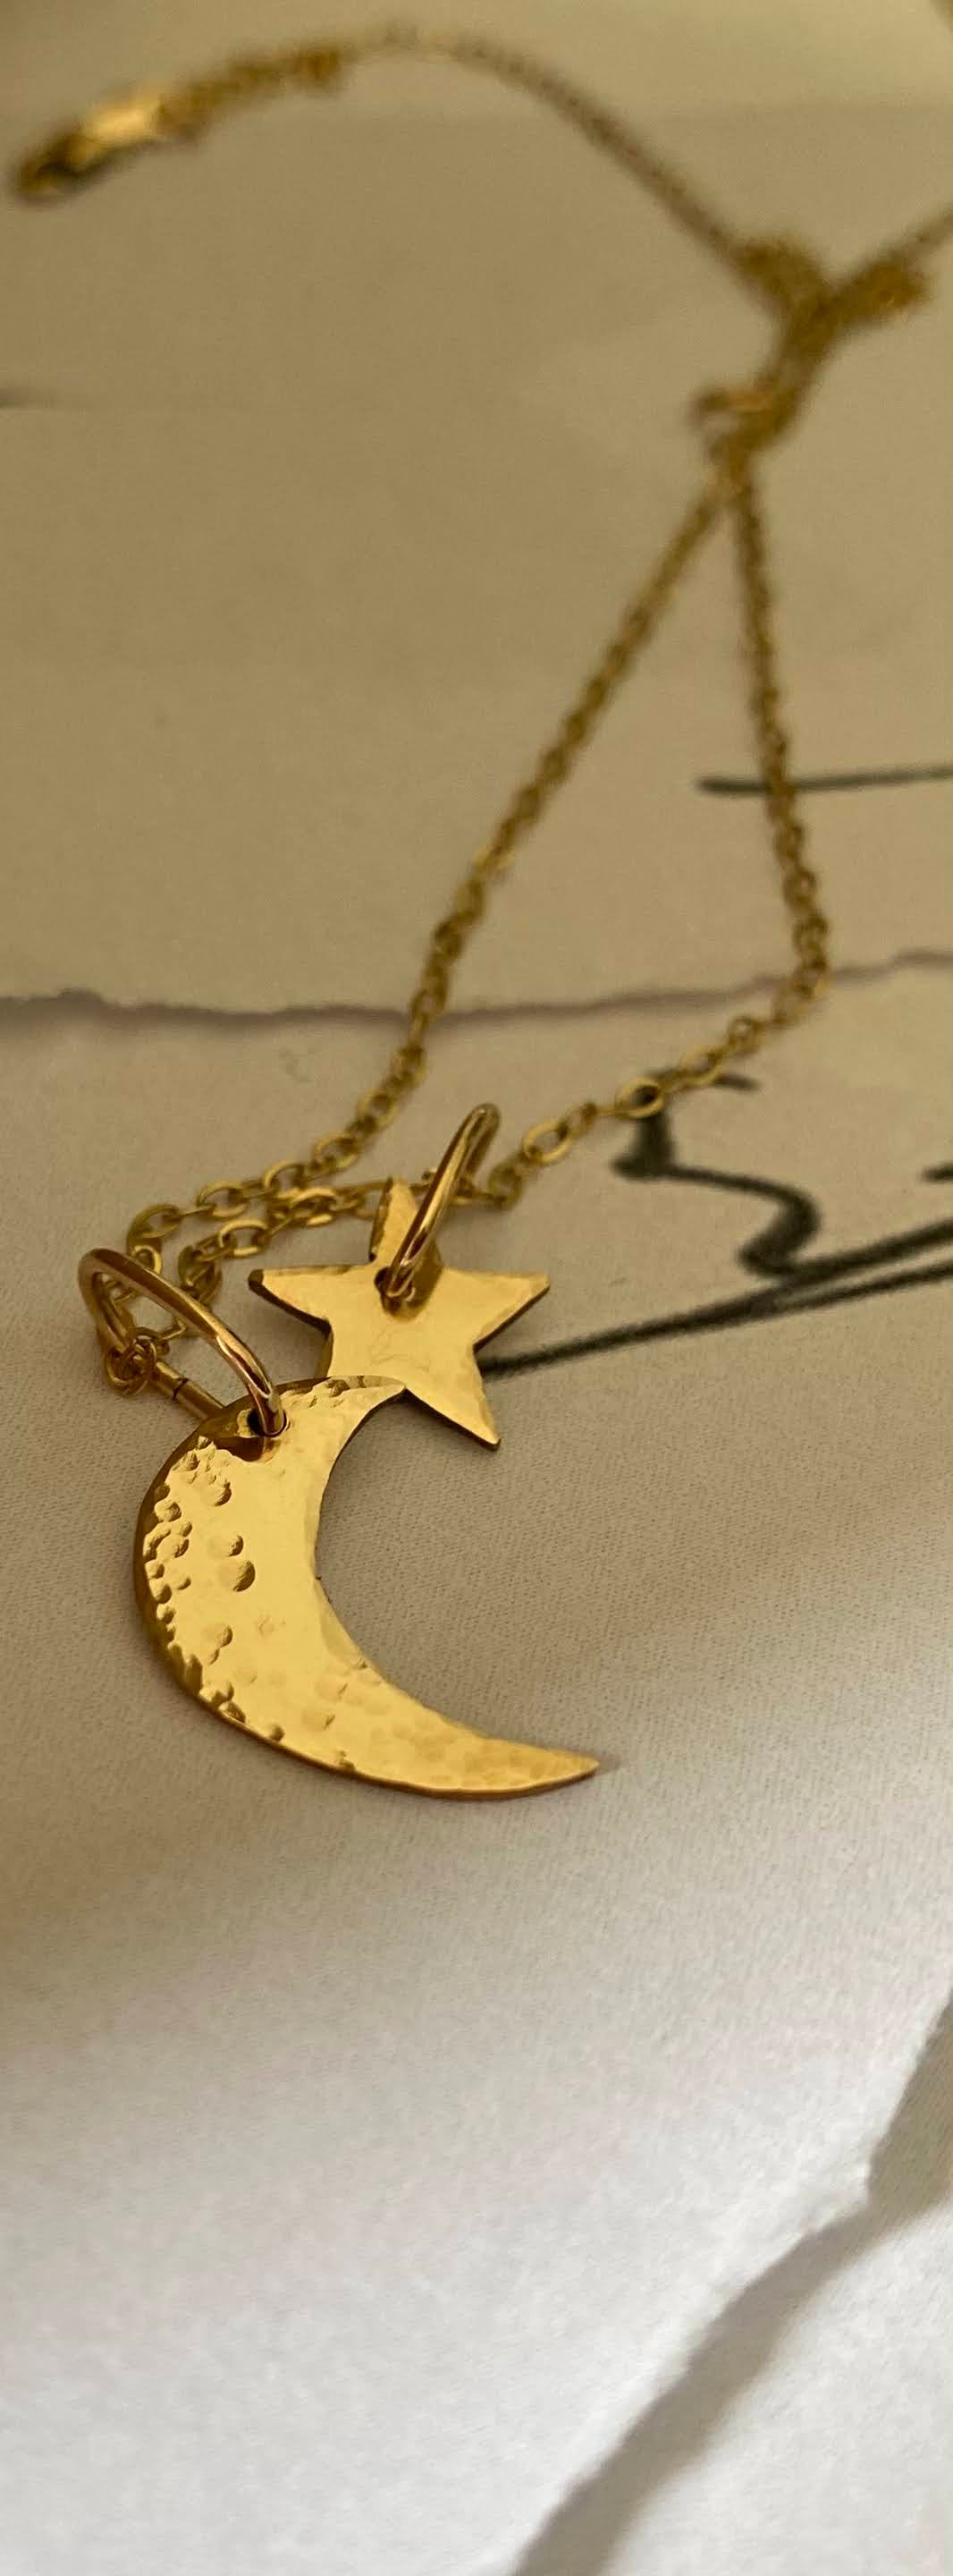 gold moon and star charms necklace andJules free spirited jewelry